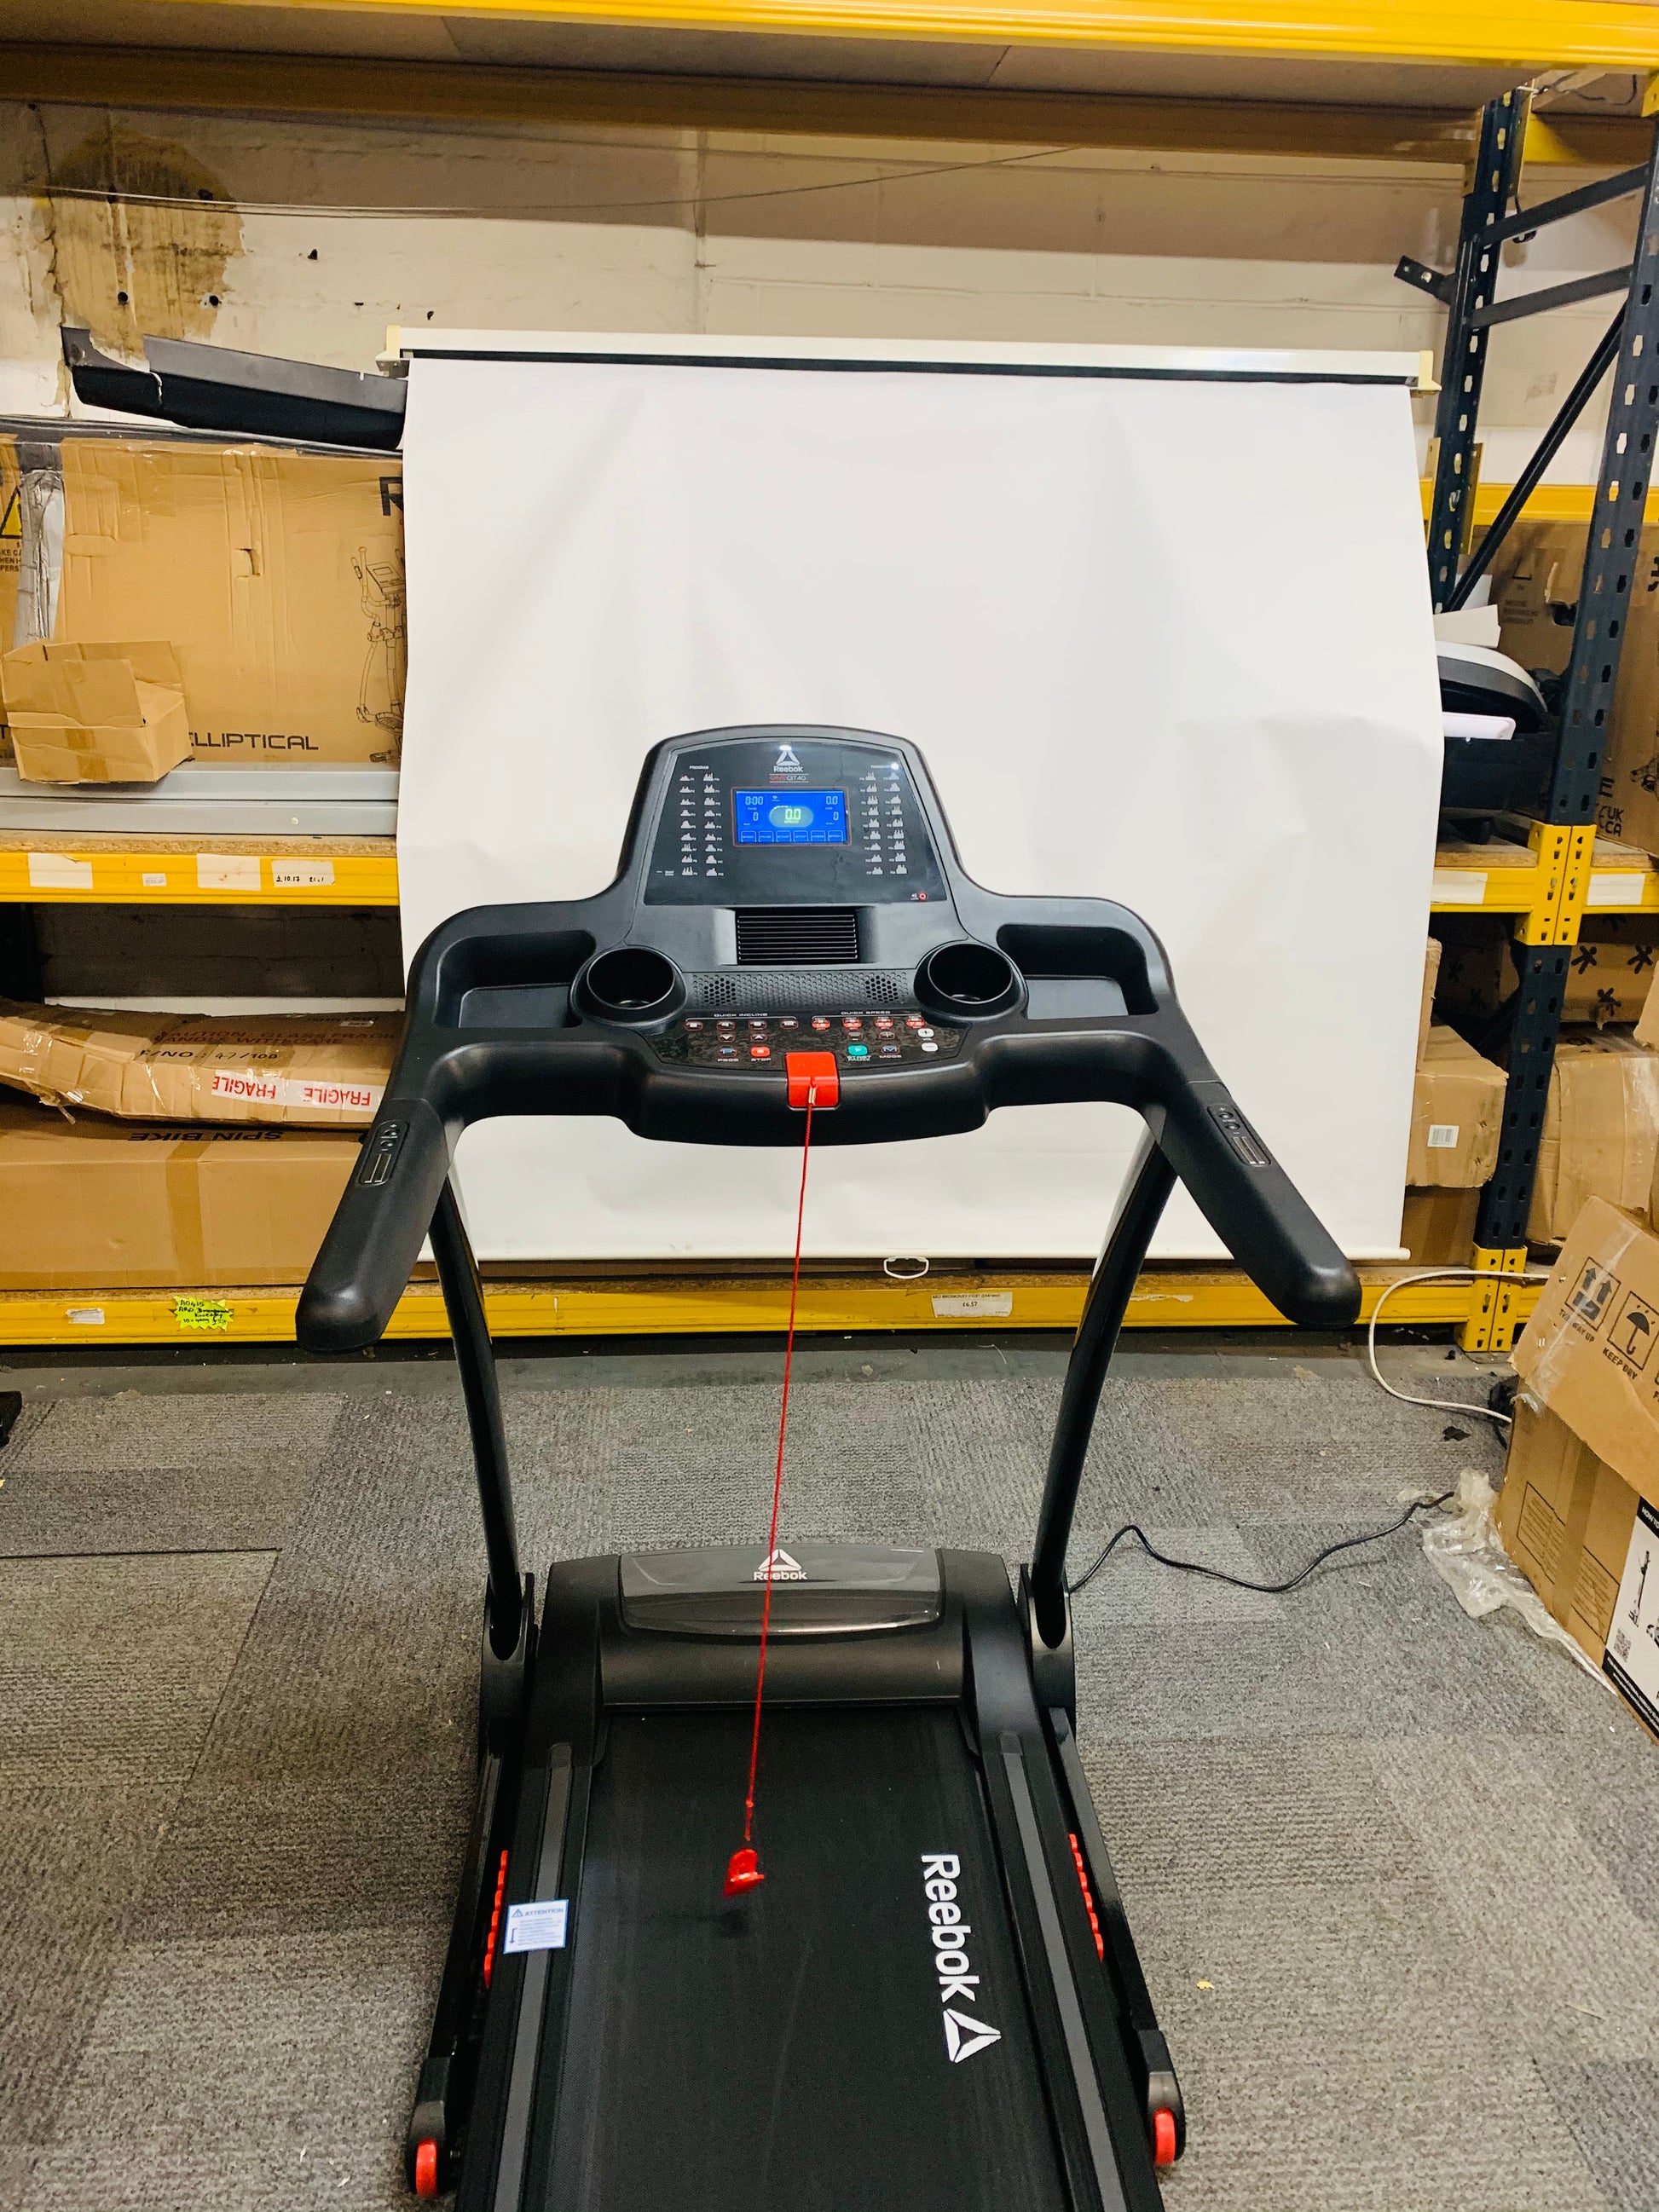 Reebok GT40s Treadmill With Incline –